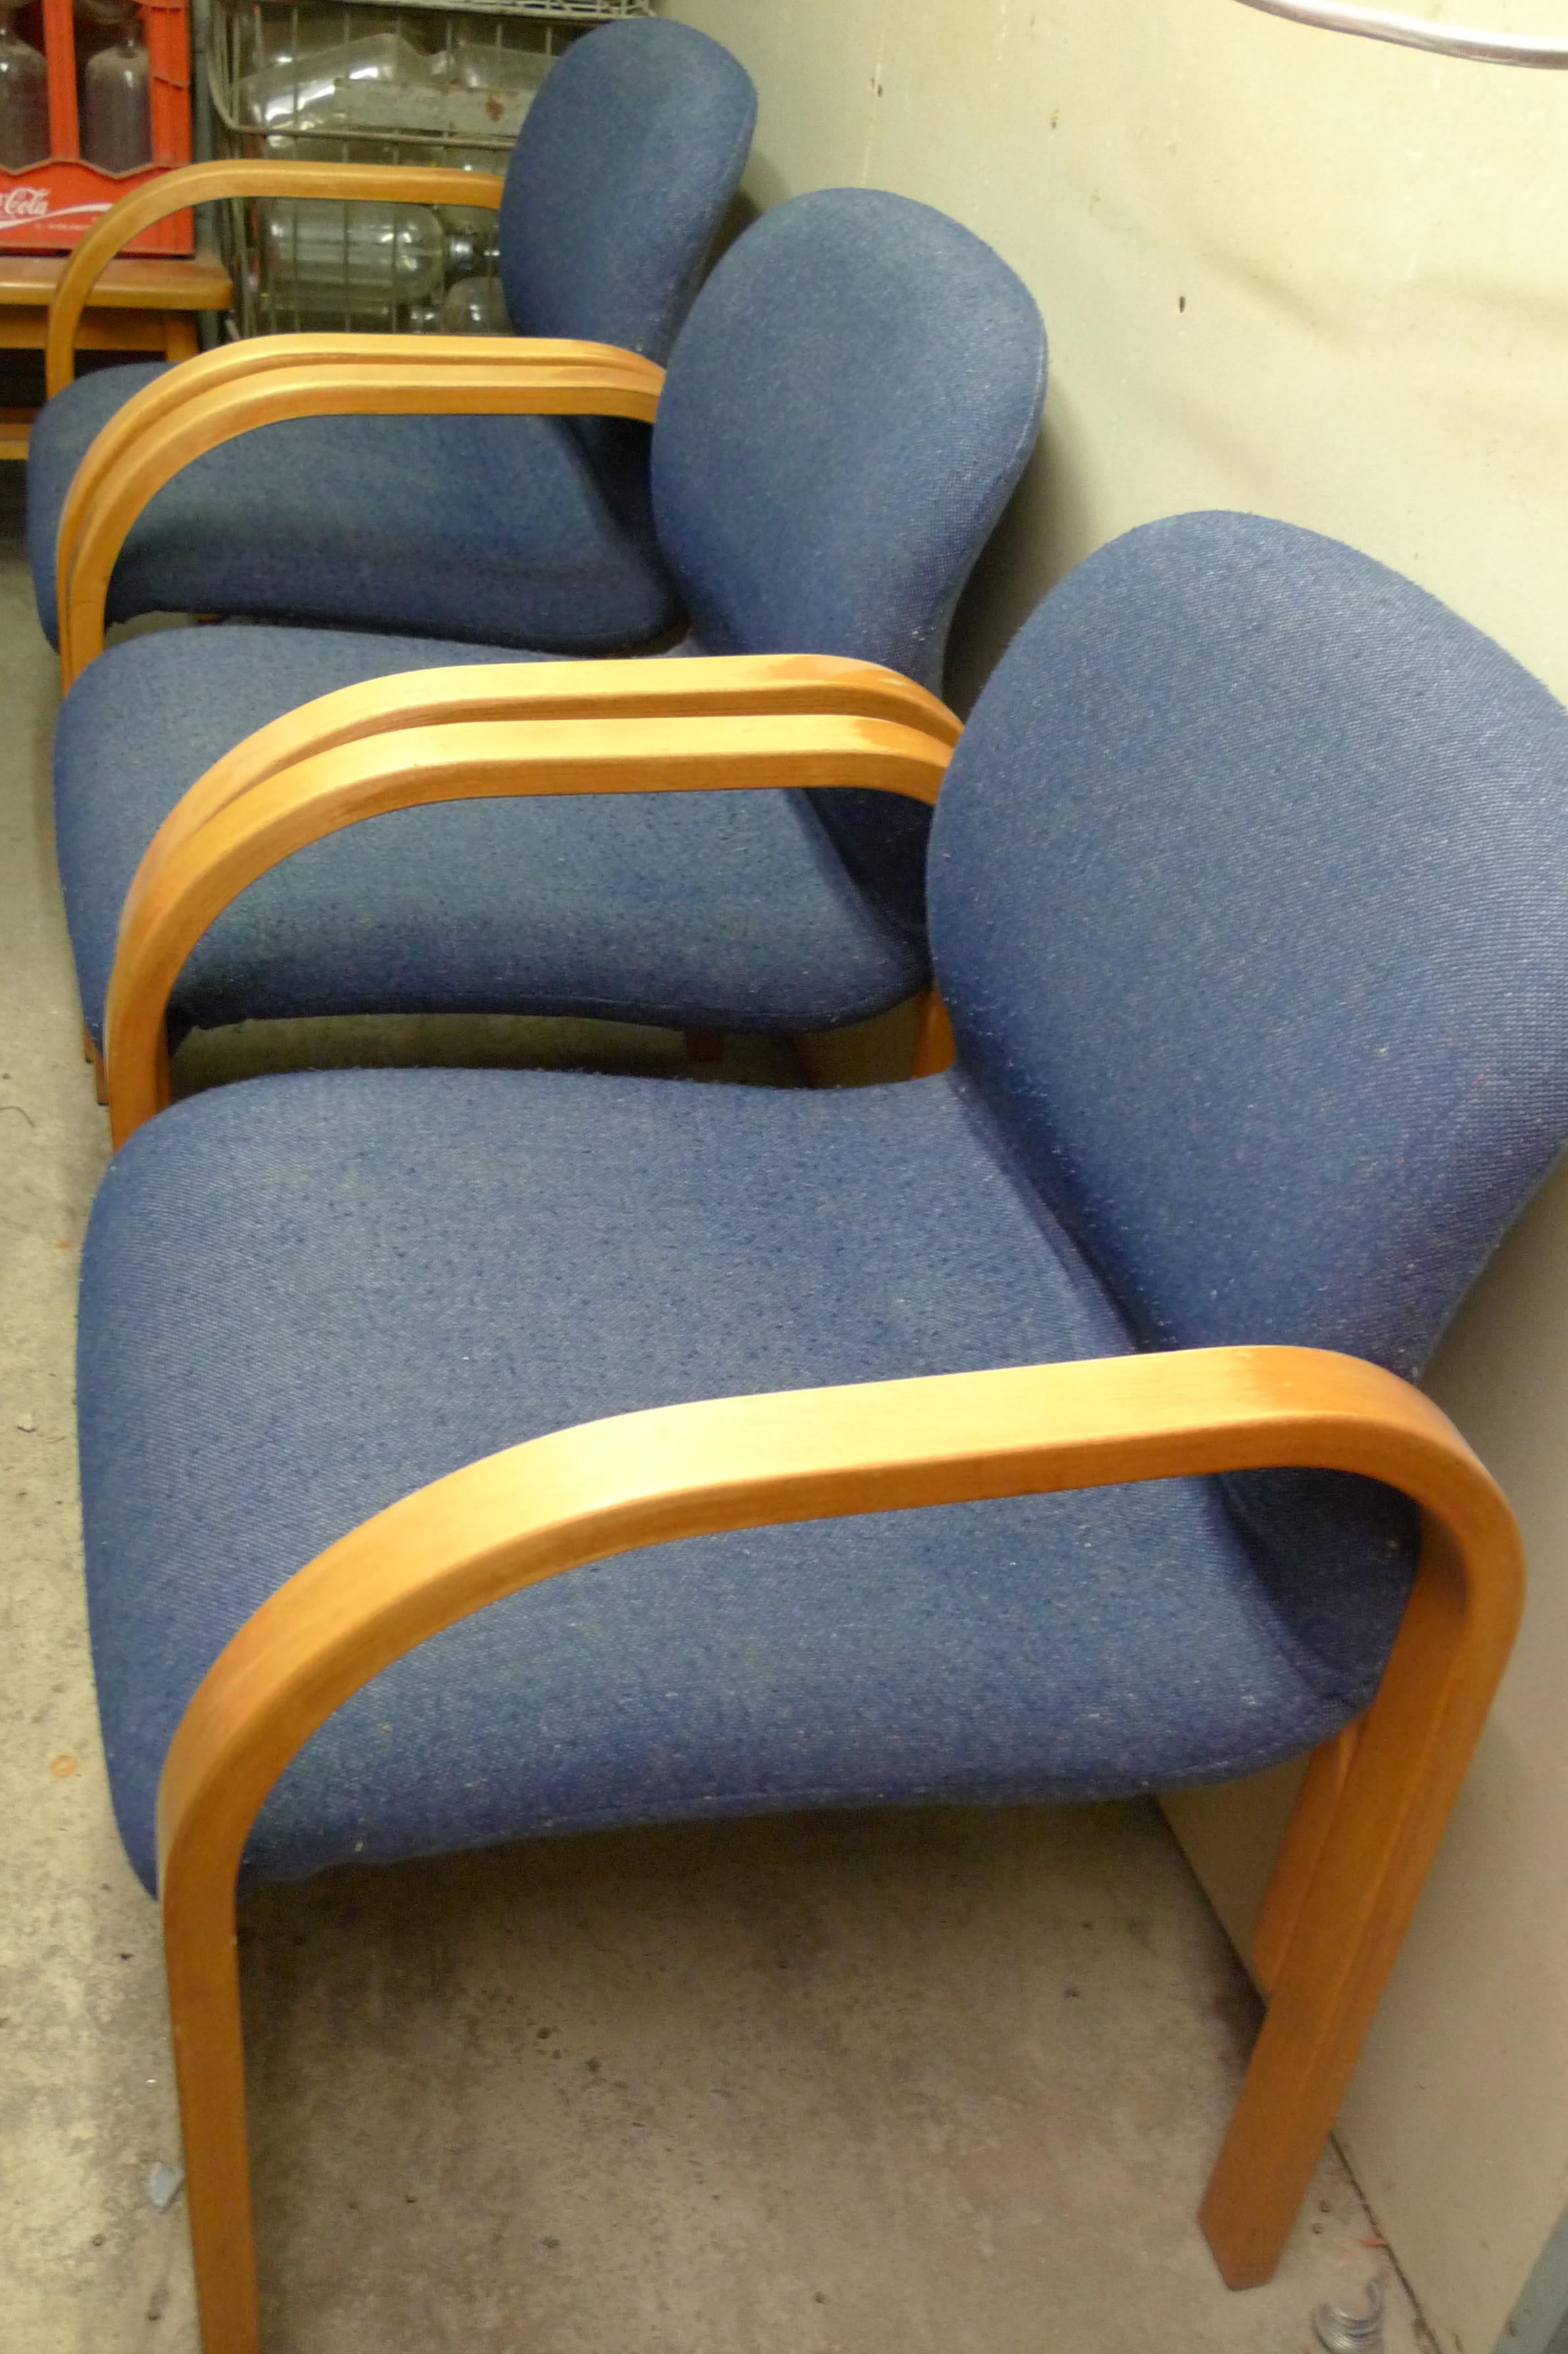 American Midcentury Chairs Upholstered in Nubbly Fabric on Hardwood Frames, Set of 3 For Sale